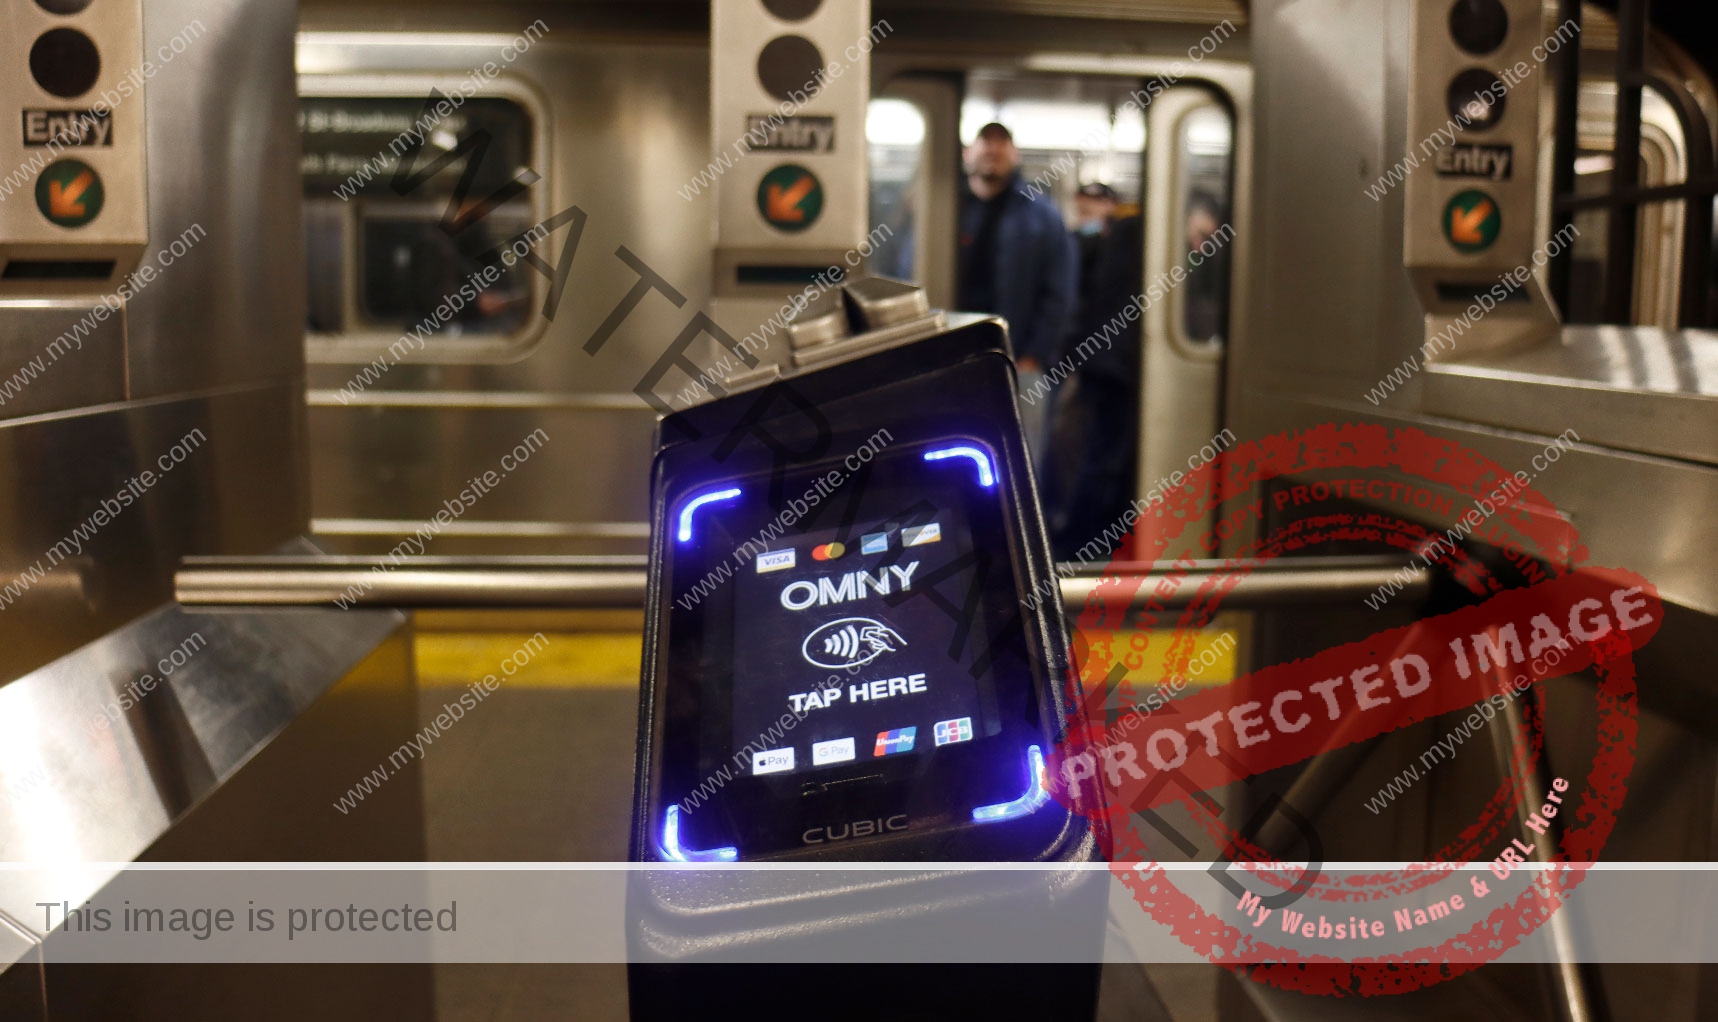 NEW YORK, NY - MARCH 5: An OMNY fare reader is pictured in front of a '1 line train at the Christopher Street subway station on March 5, 2023, in New York City. (Photo by Gary Hershorn/Getty Images)